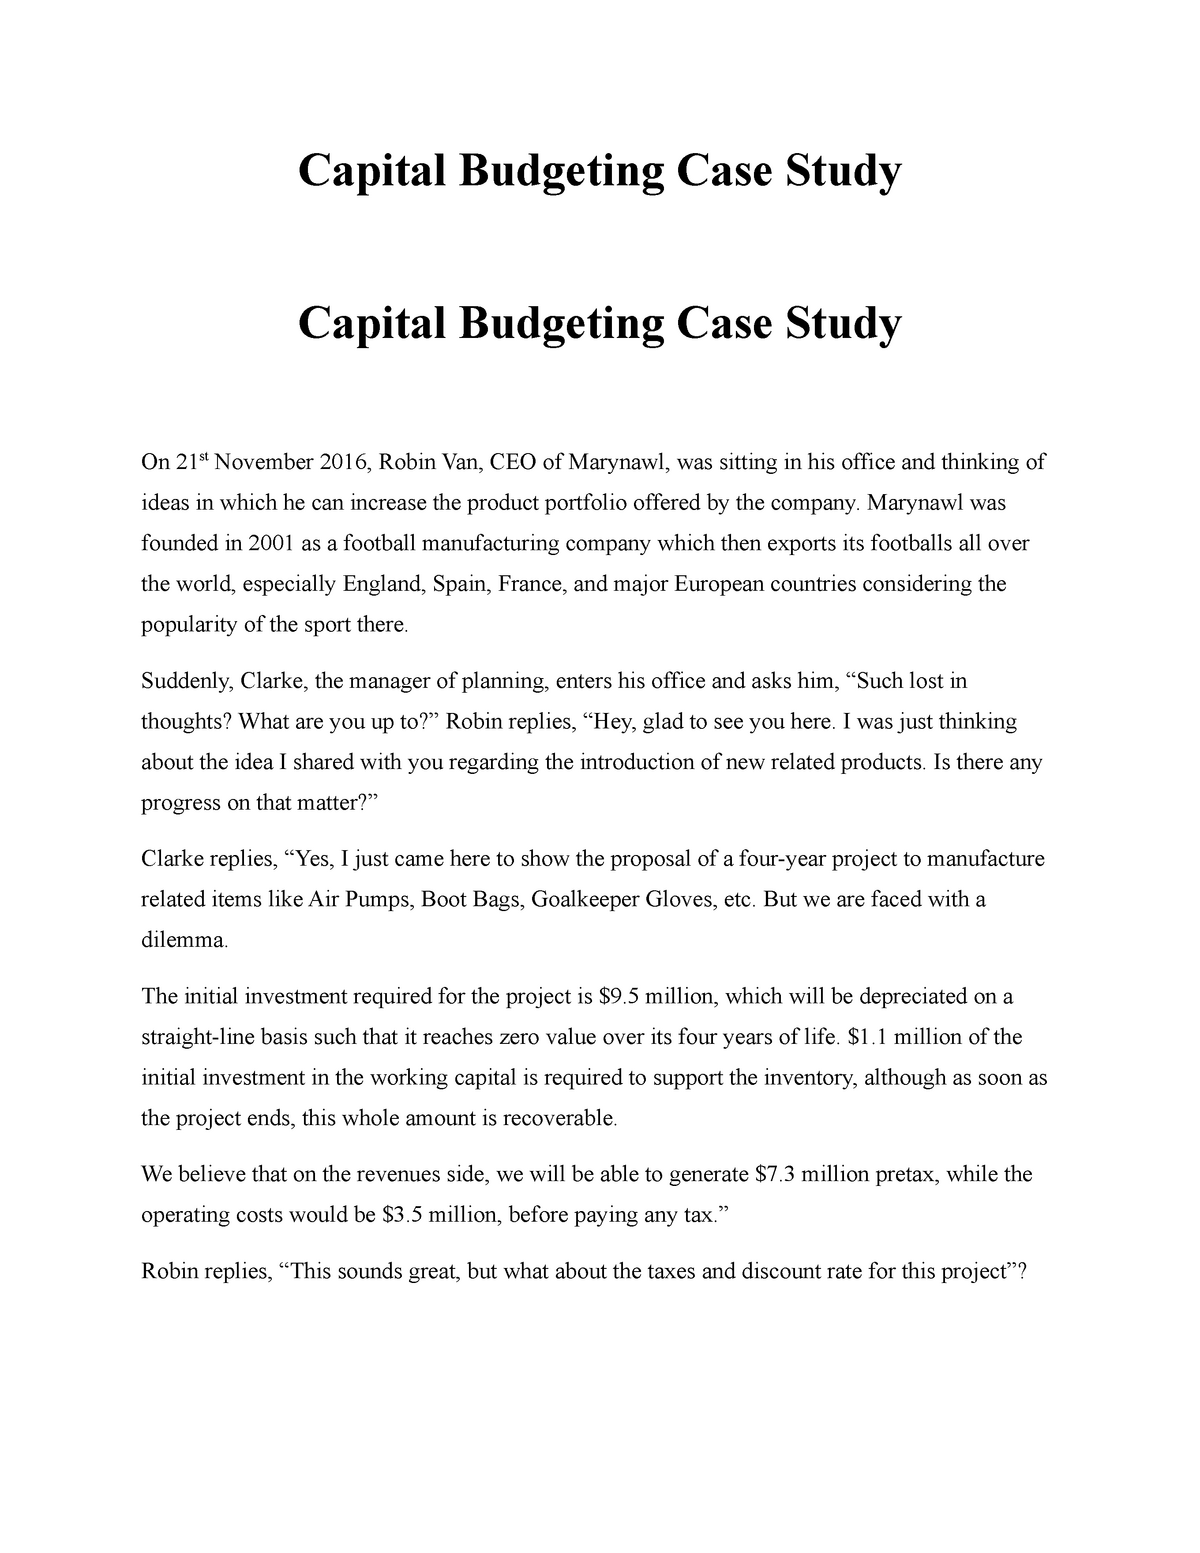 literature review on capital budgeting